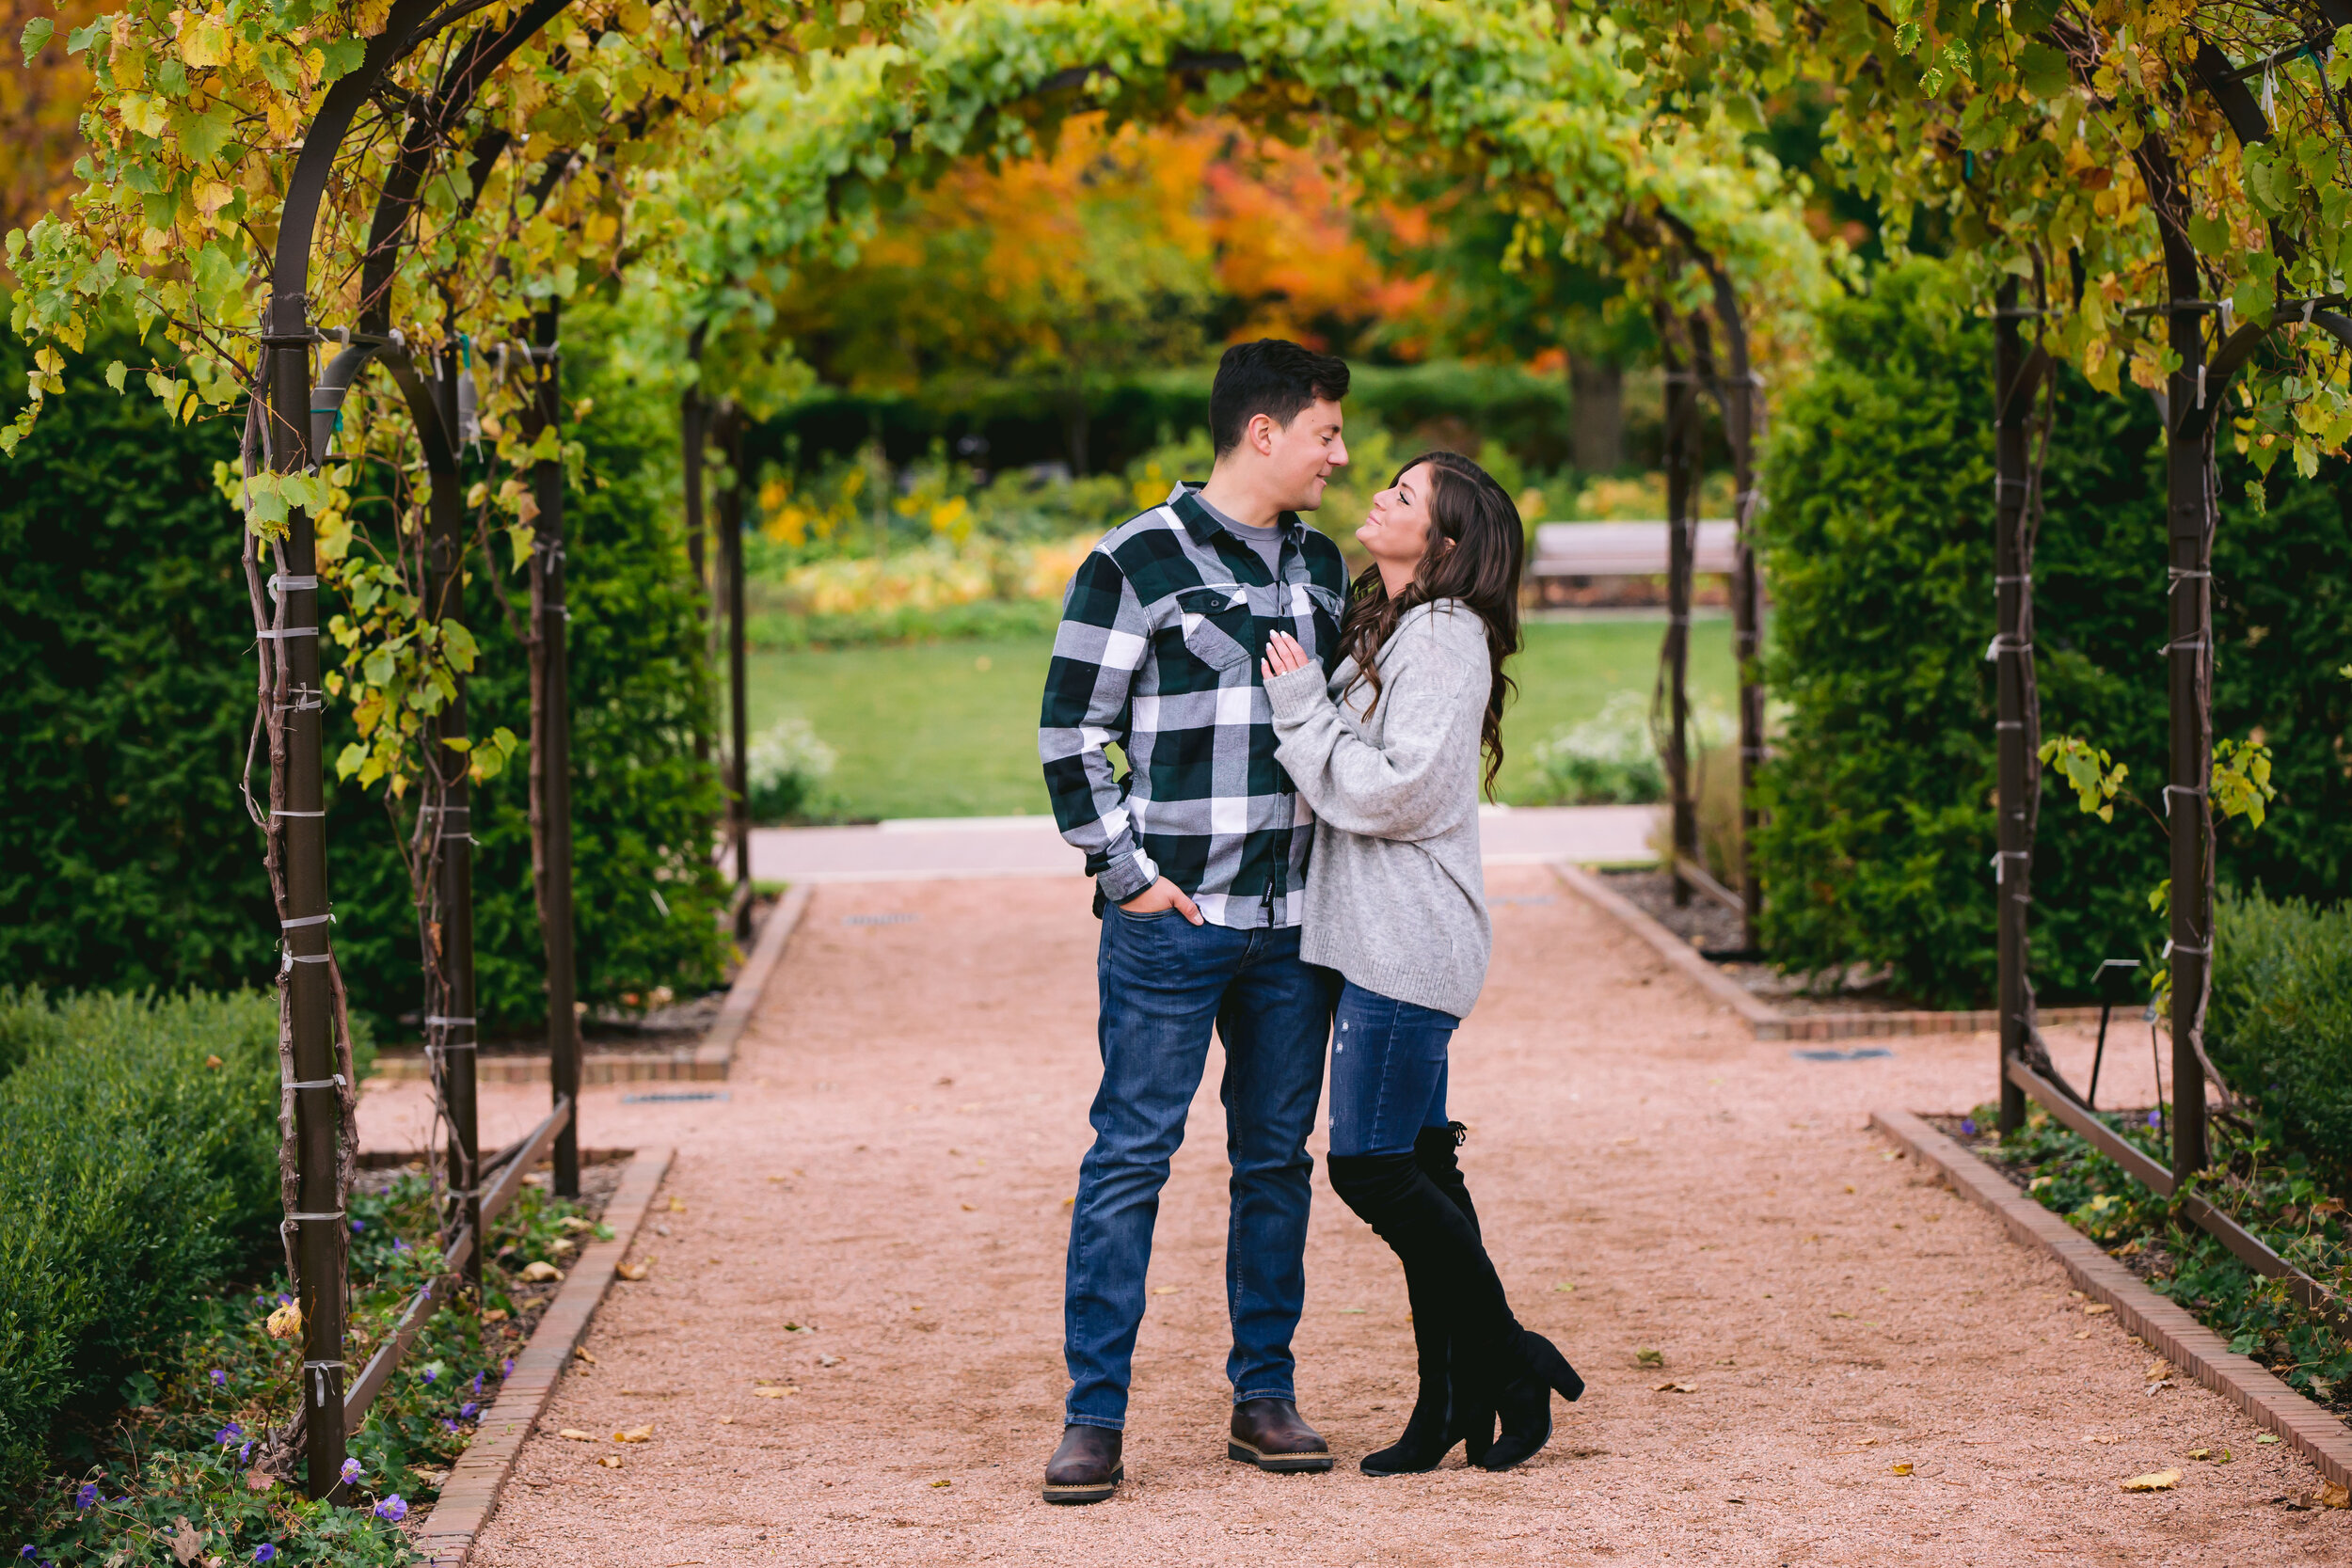 Autumn Engagement Session at Cantigny Park in Wheaton IL